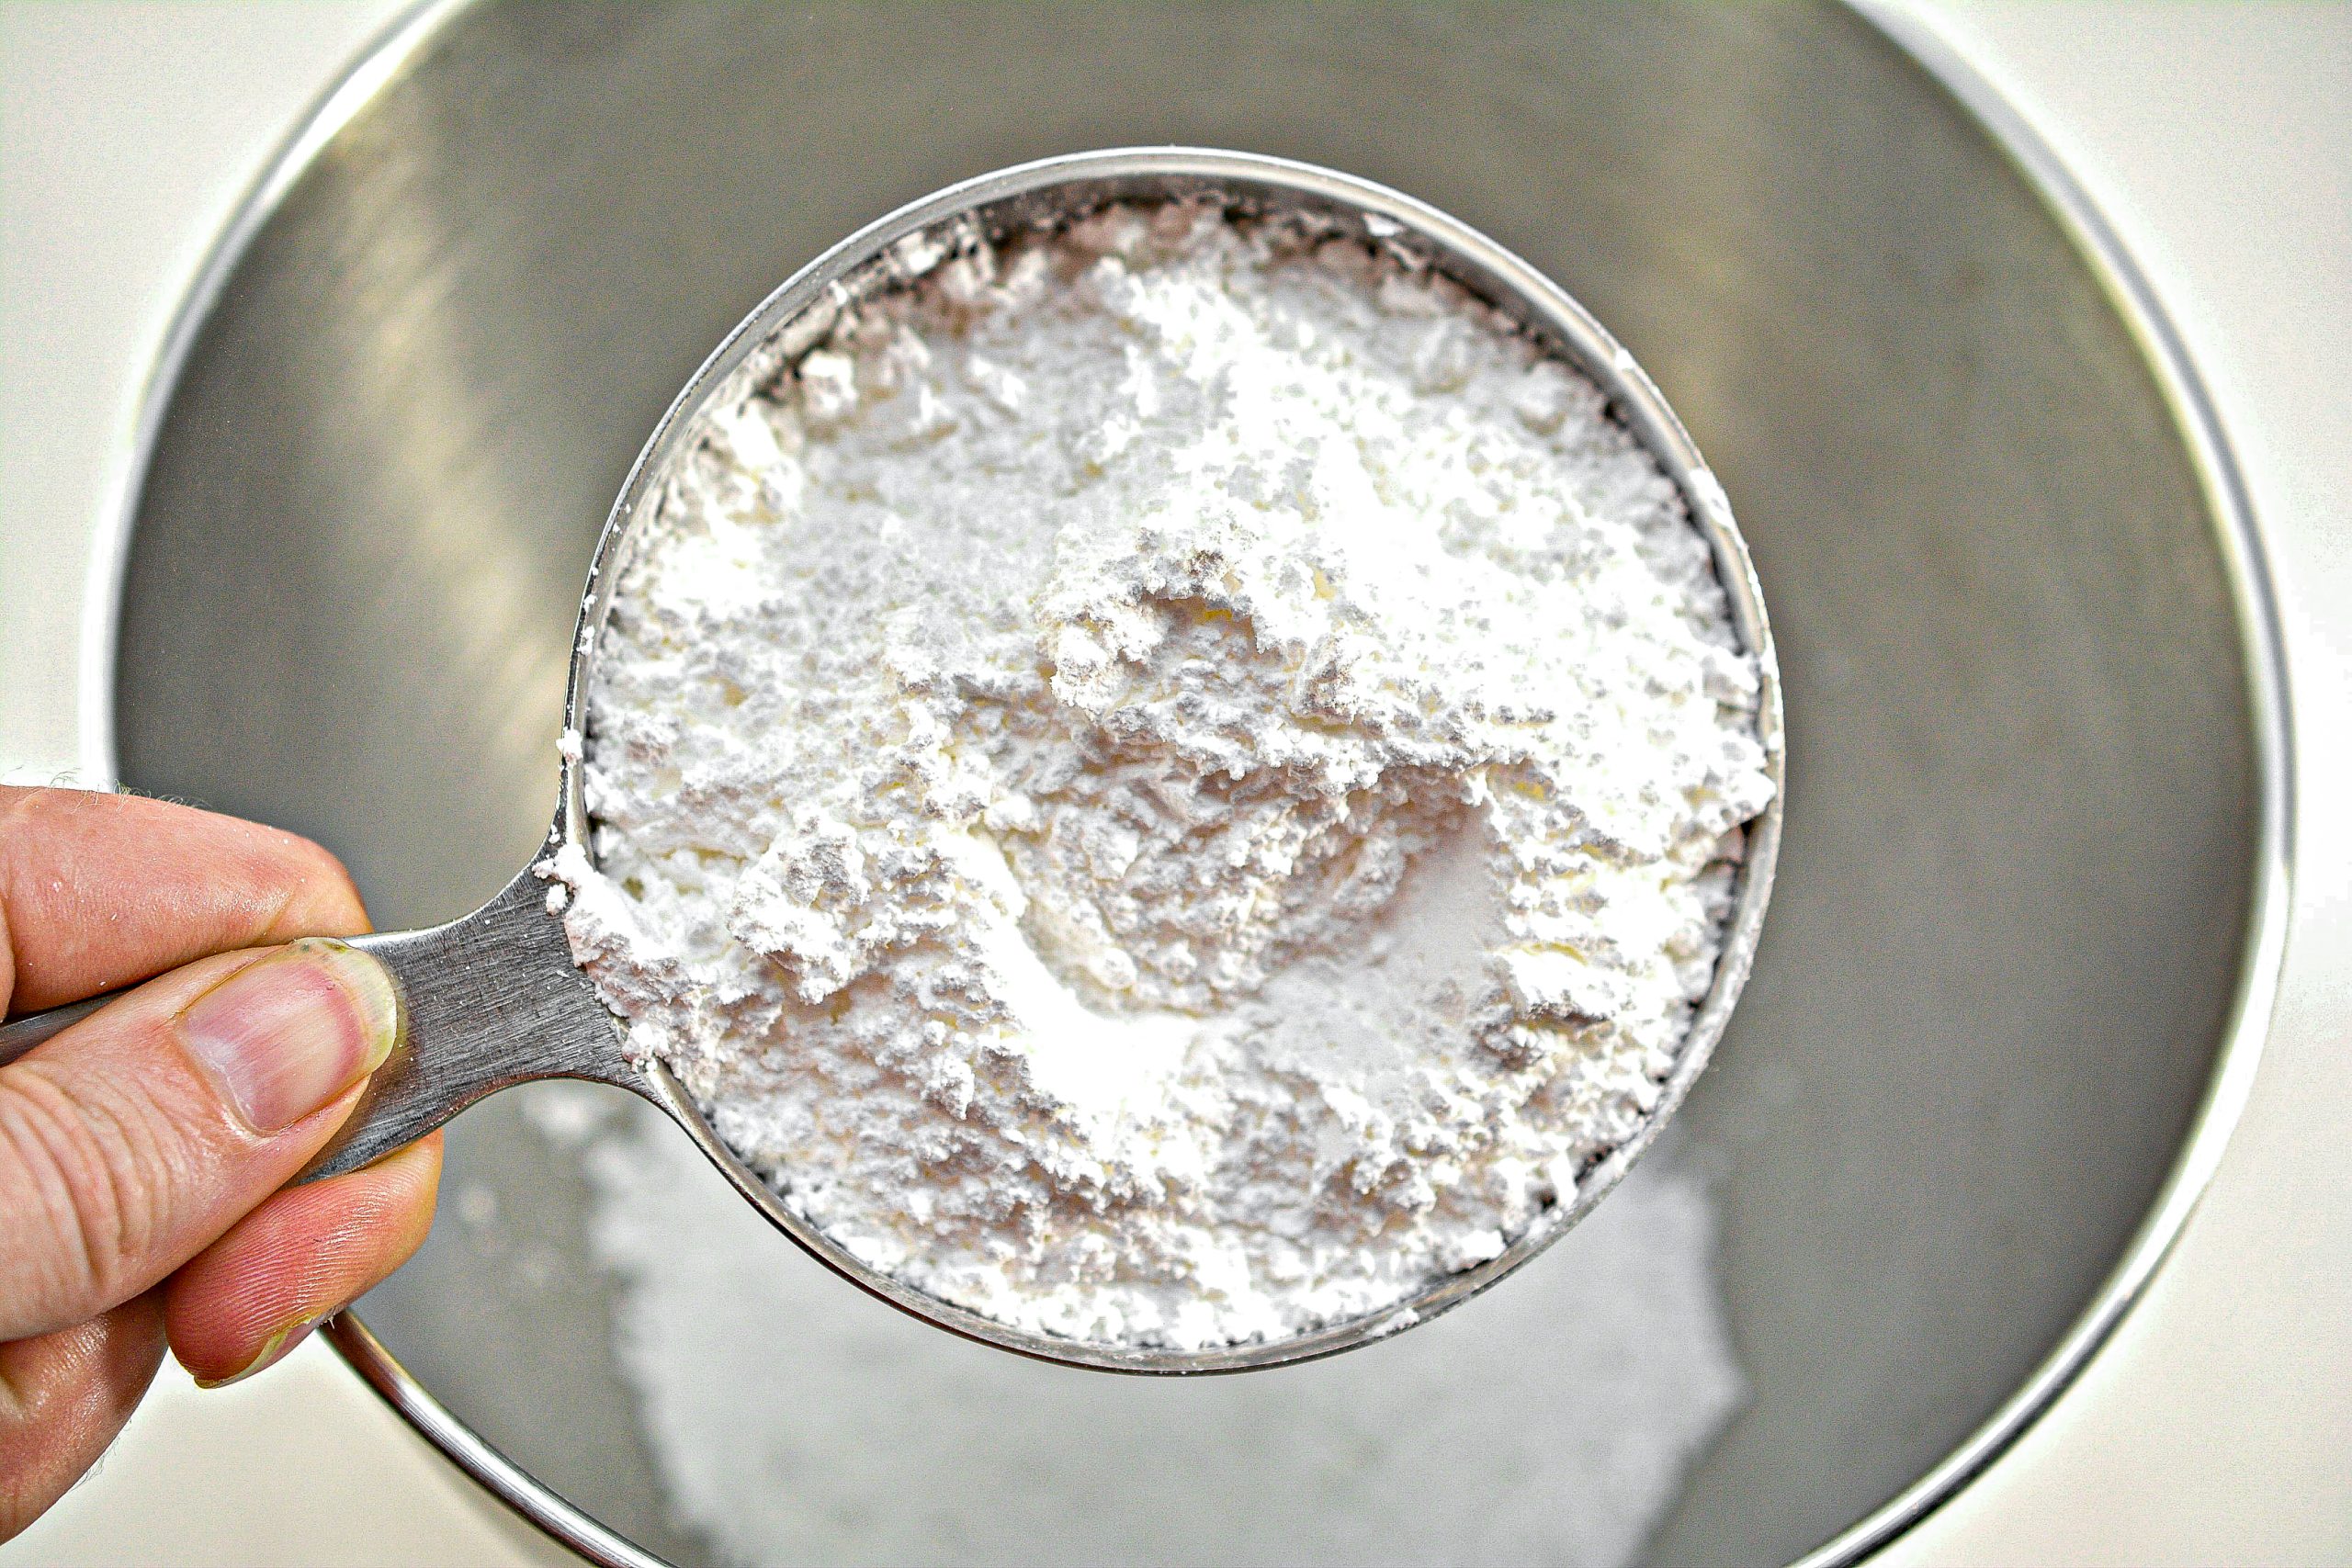 In a mixing bowl, combine the ingredients for the glaze until smooth and creamy.